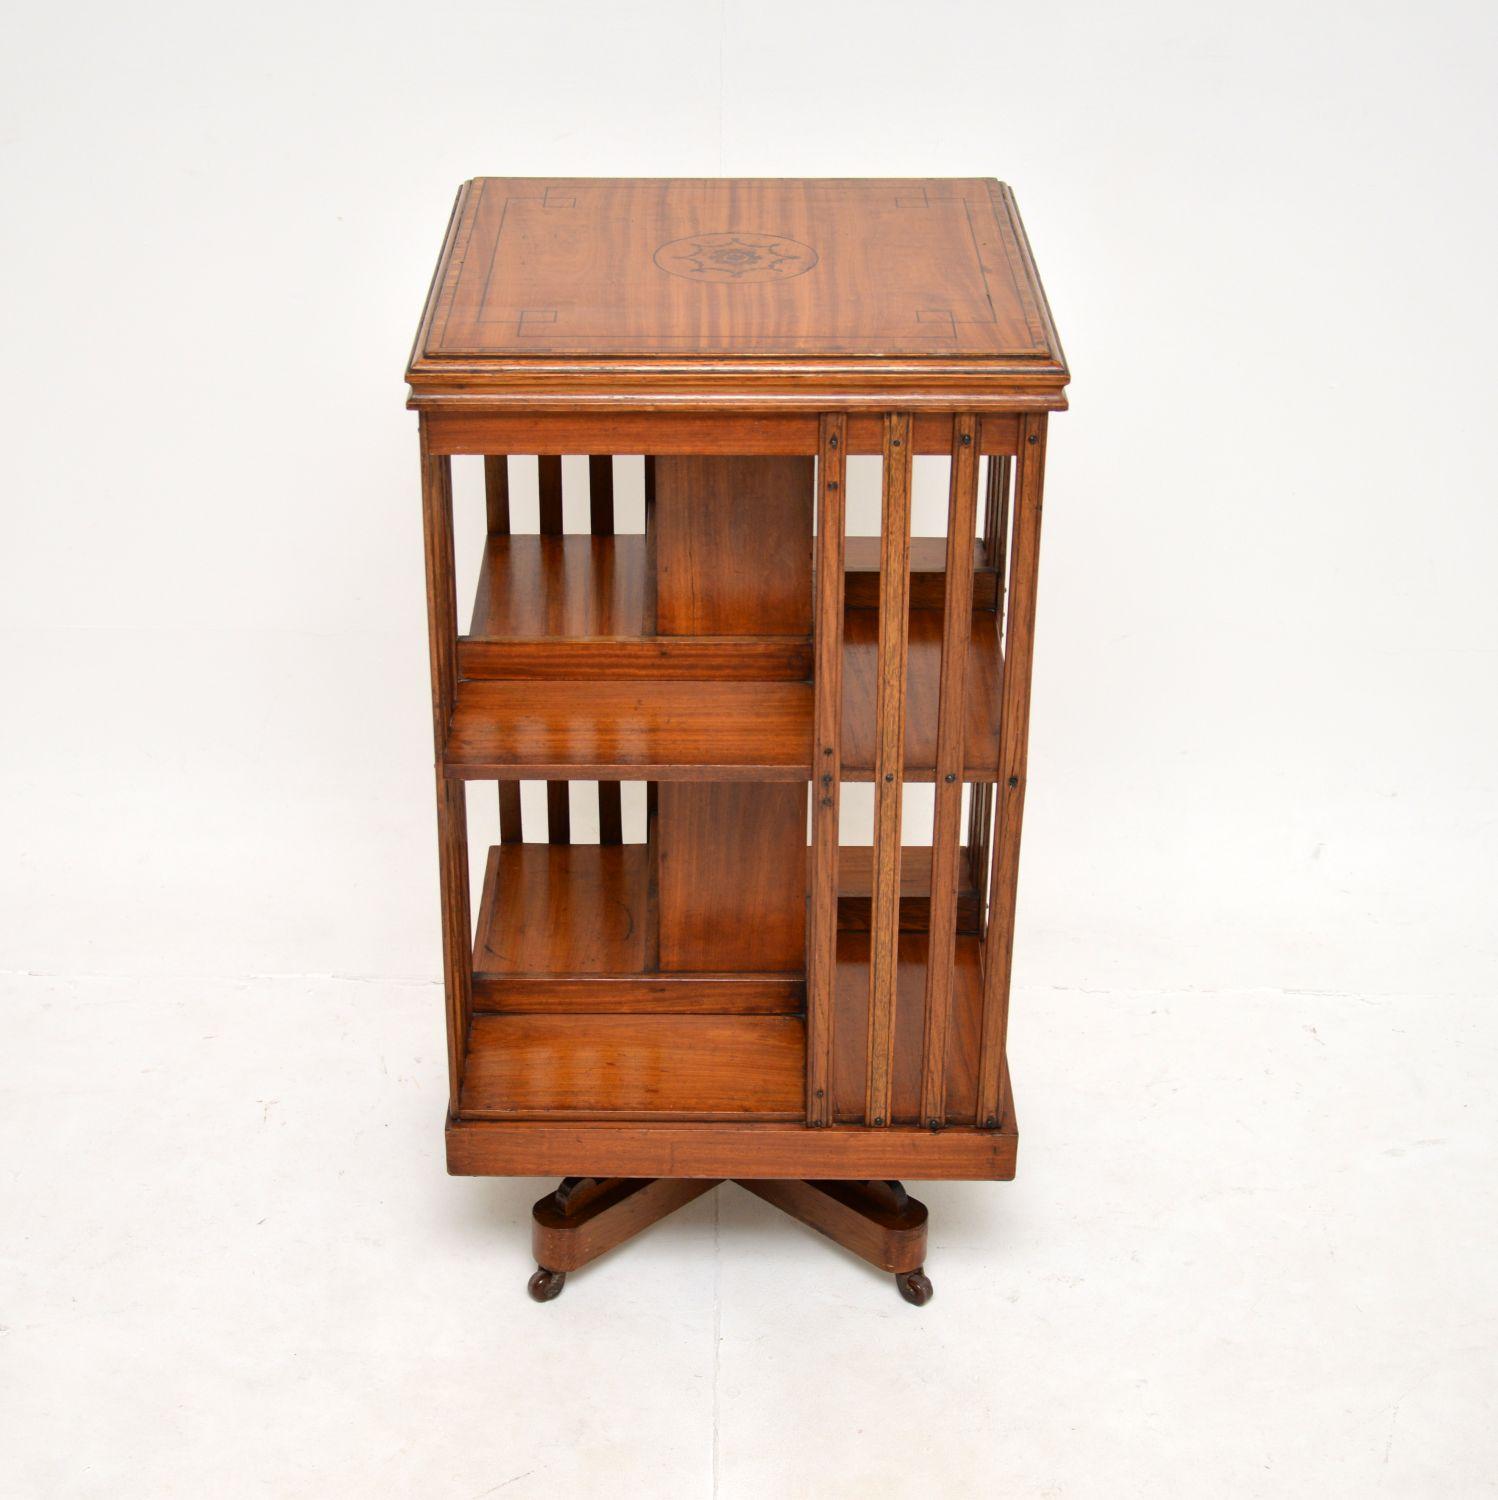 A lovely antique Edwardian inlaid satin wood revolving bookcase. This was made in England, it dates from around 1900-1910.

The quality is fantastic, this is a useful and beautifully designed item. The satin wood top has gorgeous inlays of walnut in